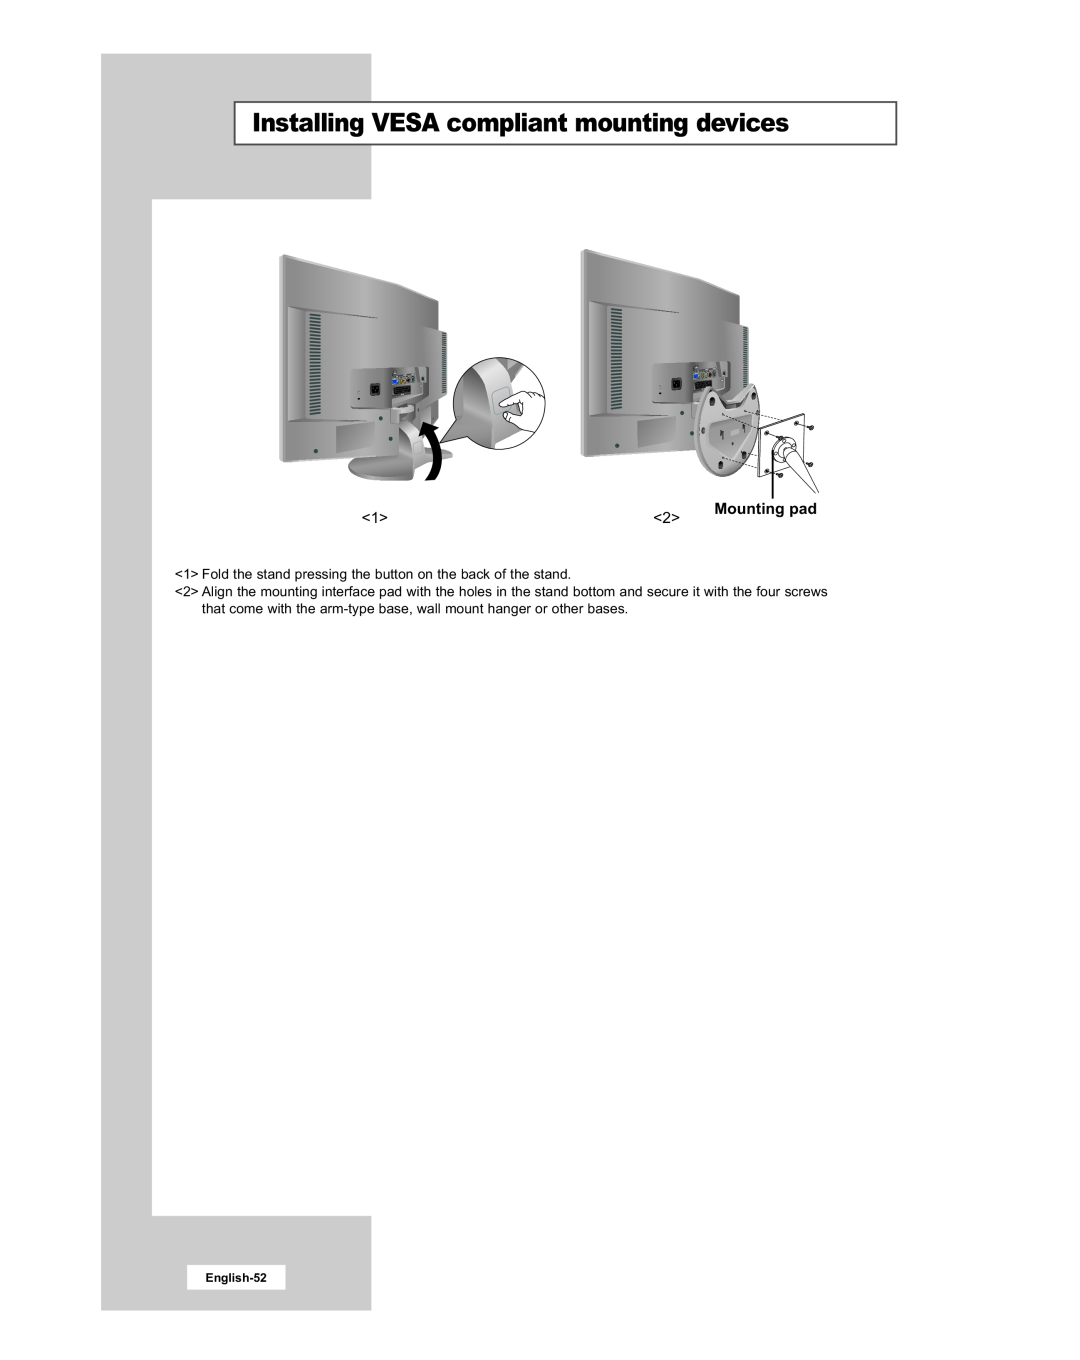 Samsung LE20S51BU manual Installing VESA compliant mounting devices, Mounting pad, English-52 